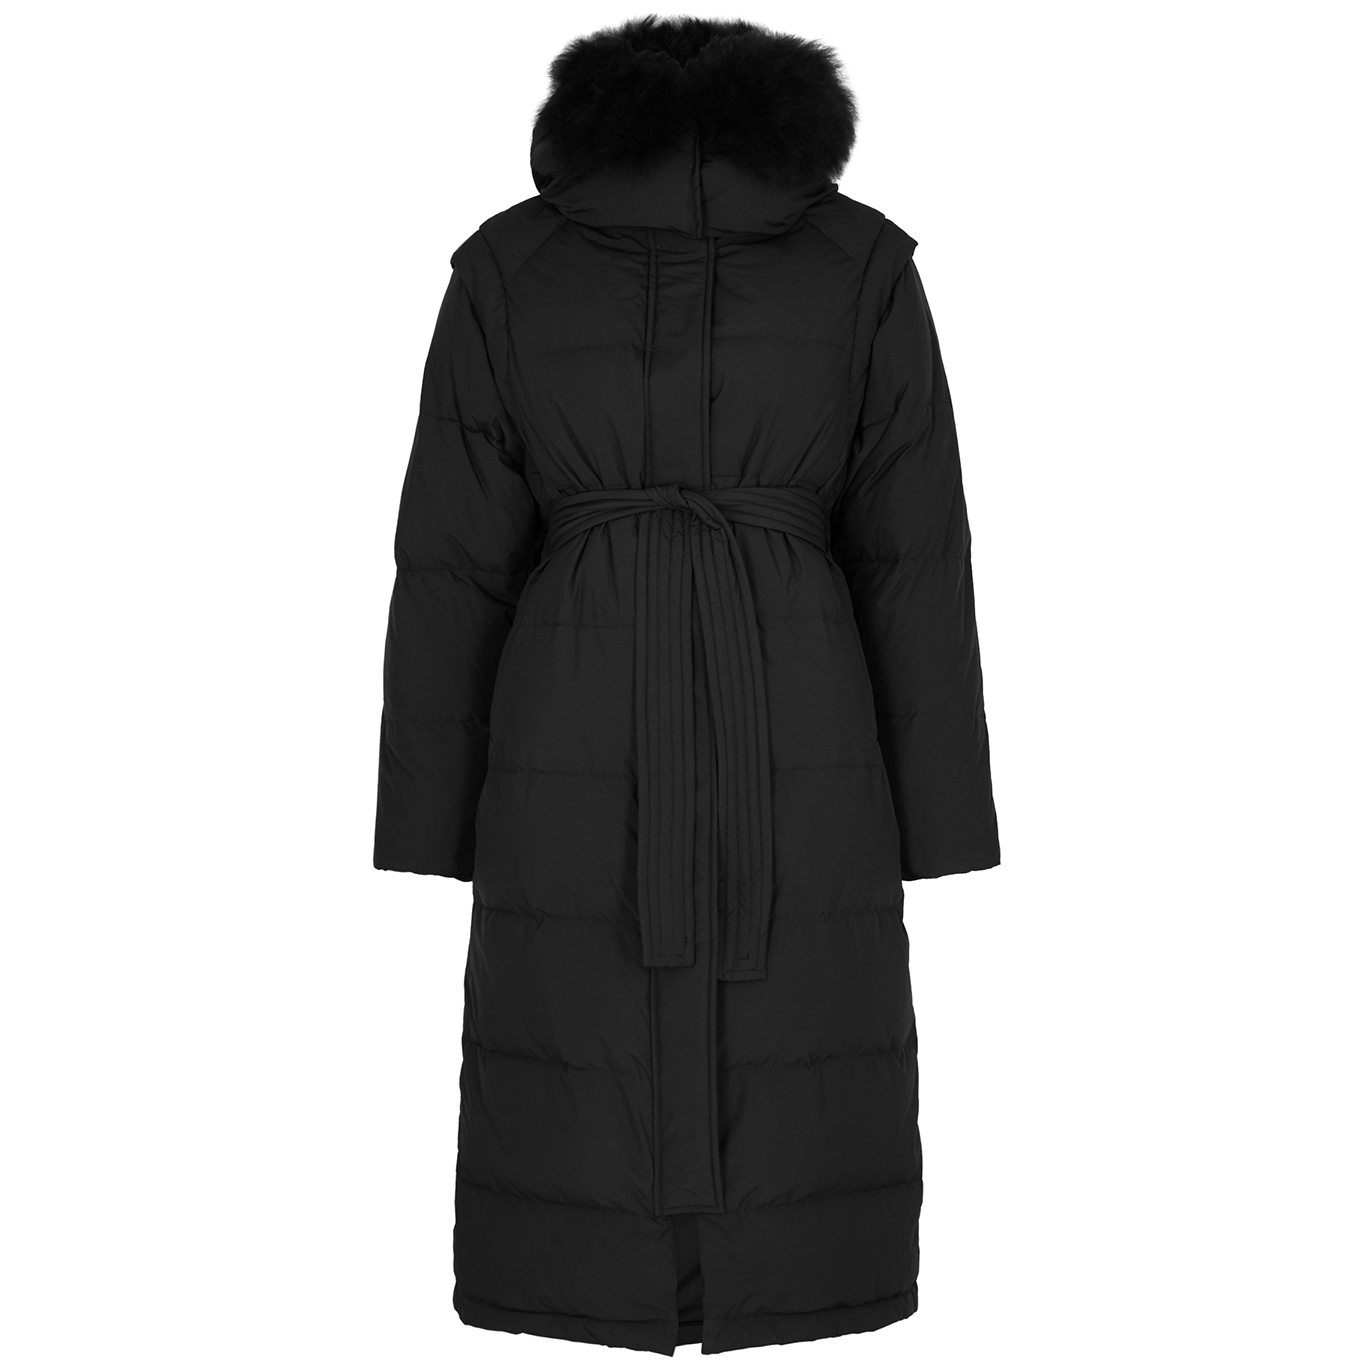 Yves Salomon Black Fur-trimmed Quilted Shell Coat - 6